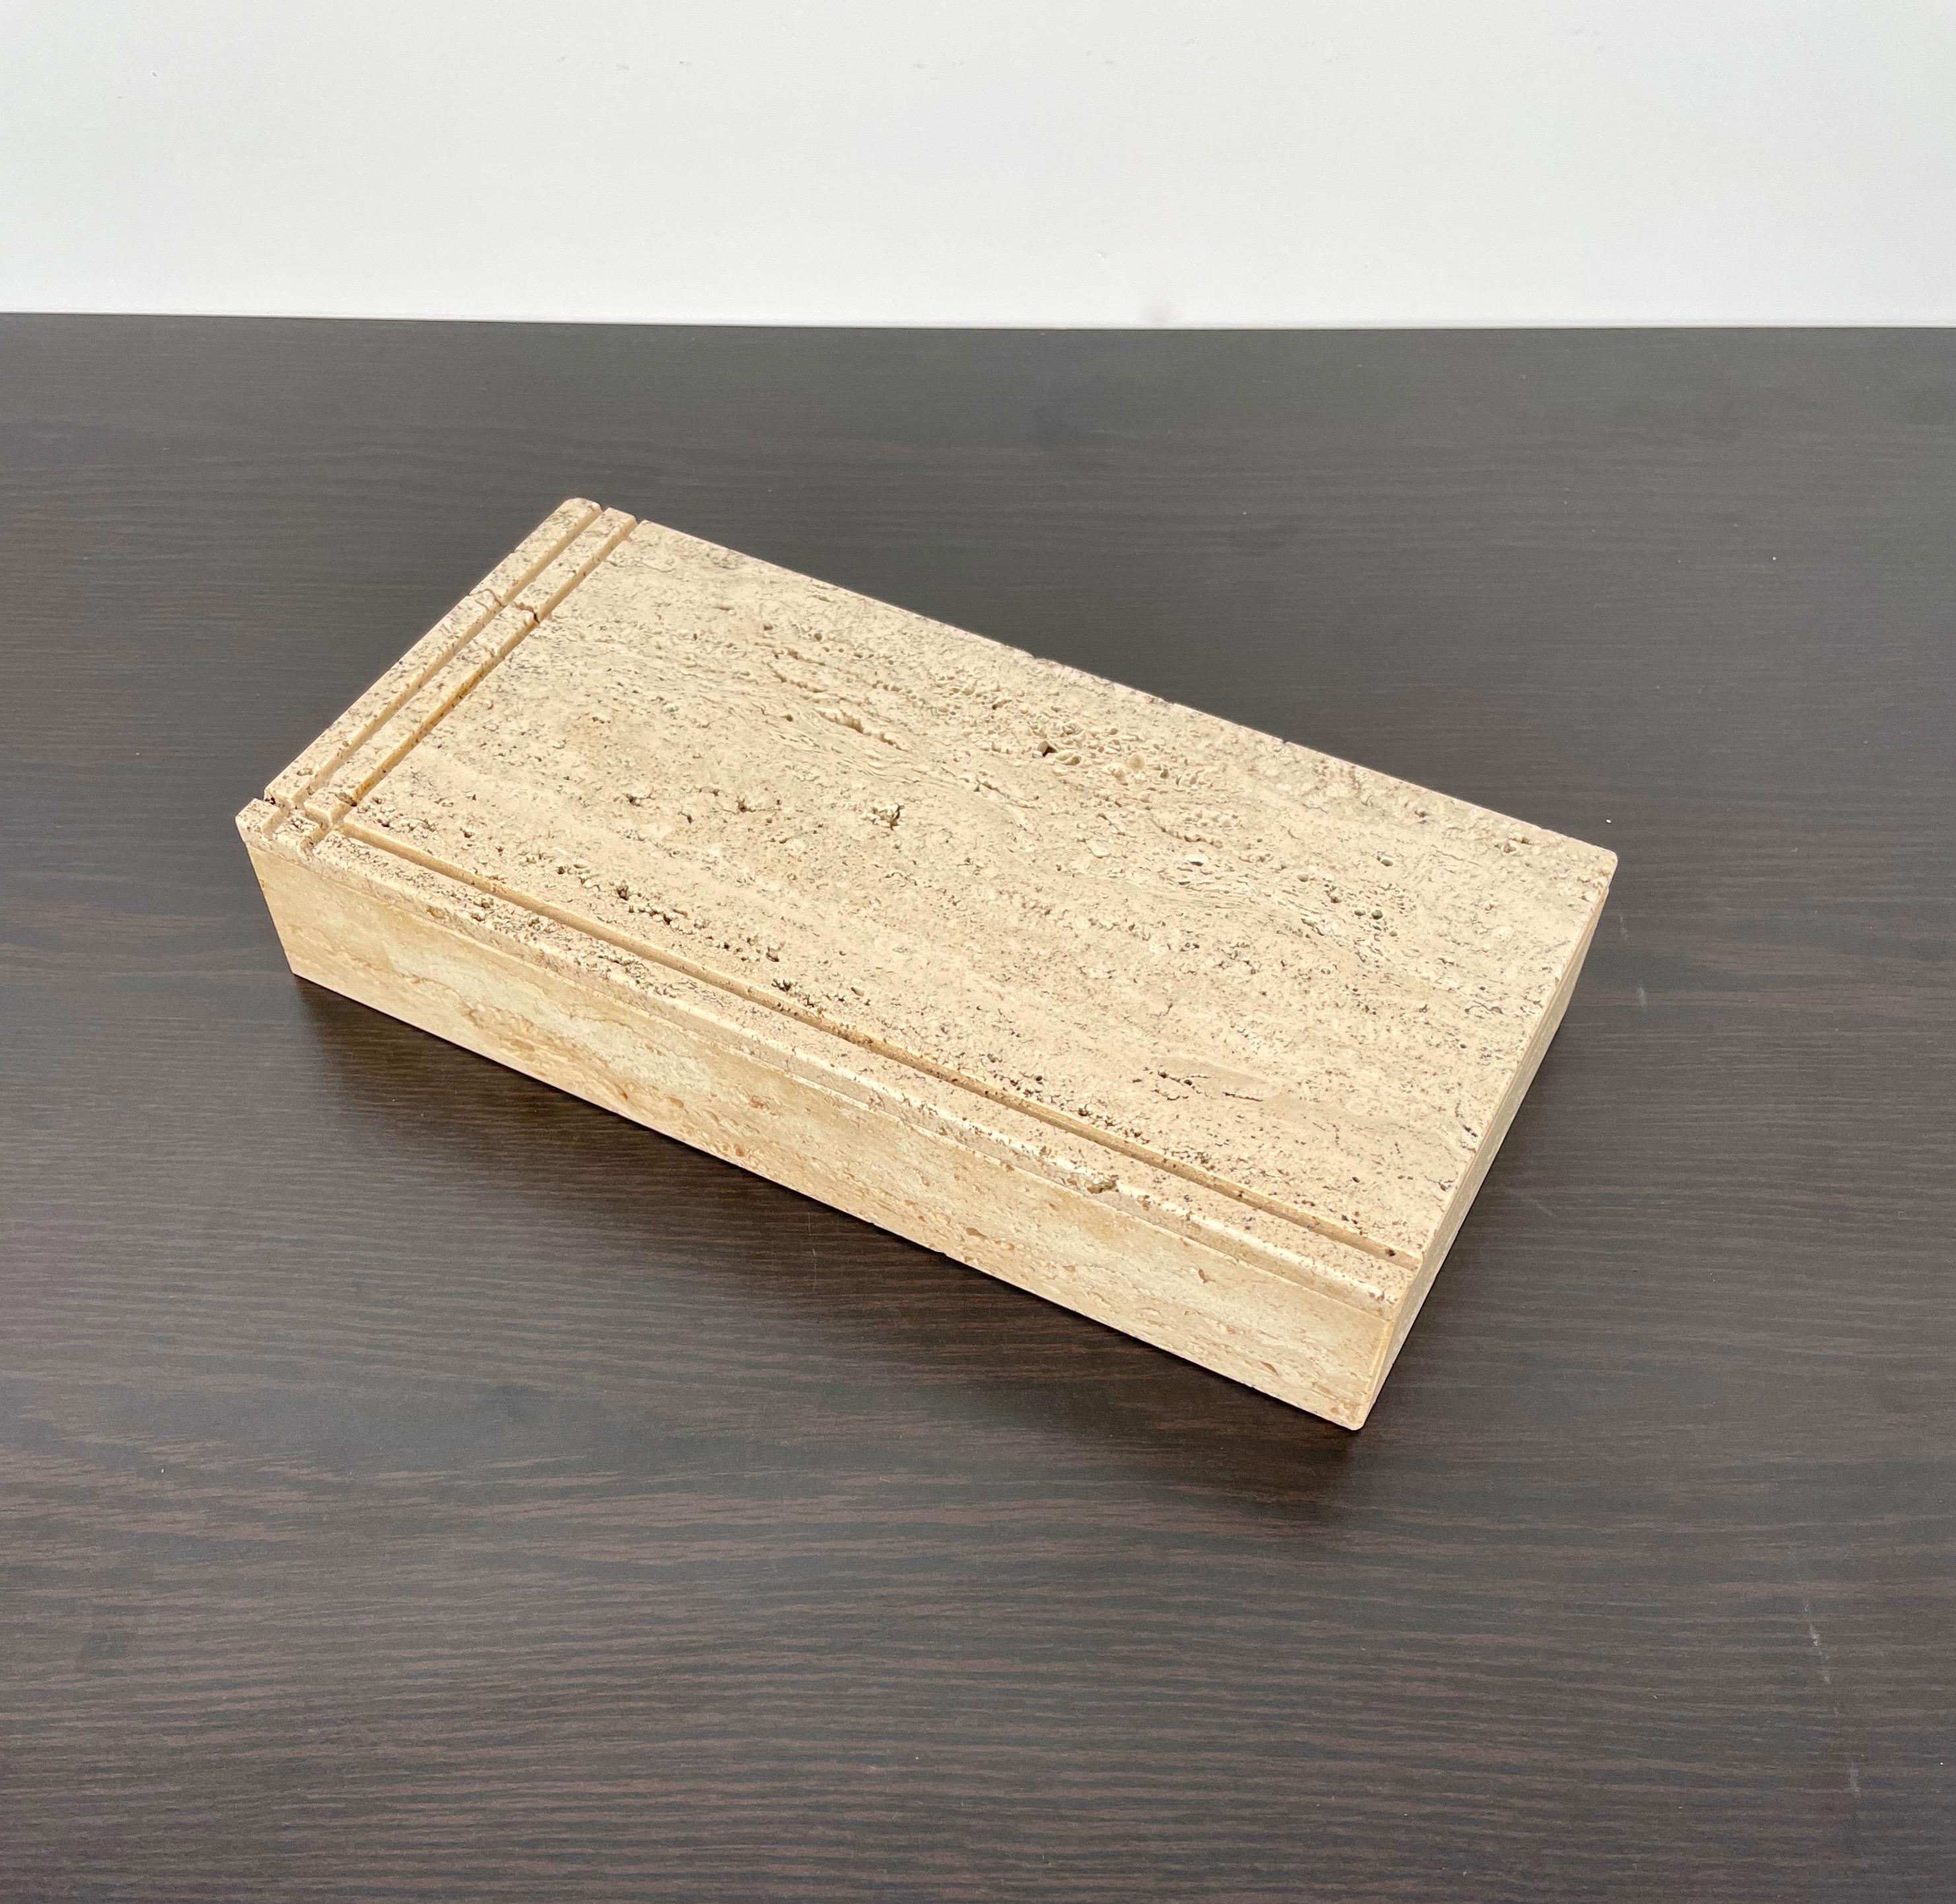 Rectangular travertine marble box attributed to Fratelli Mannelli made in Italy in the 1970s.